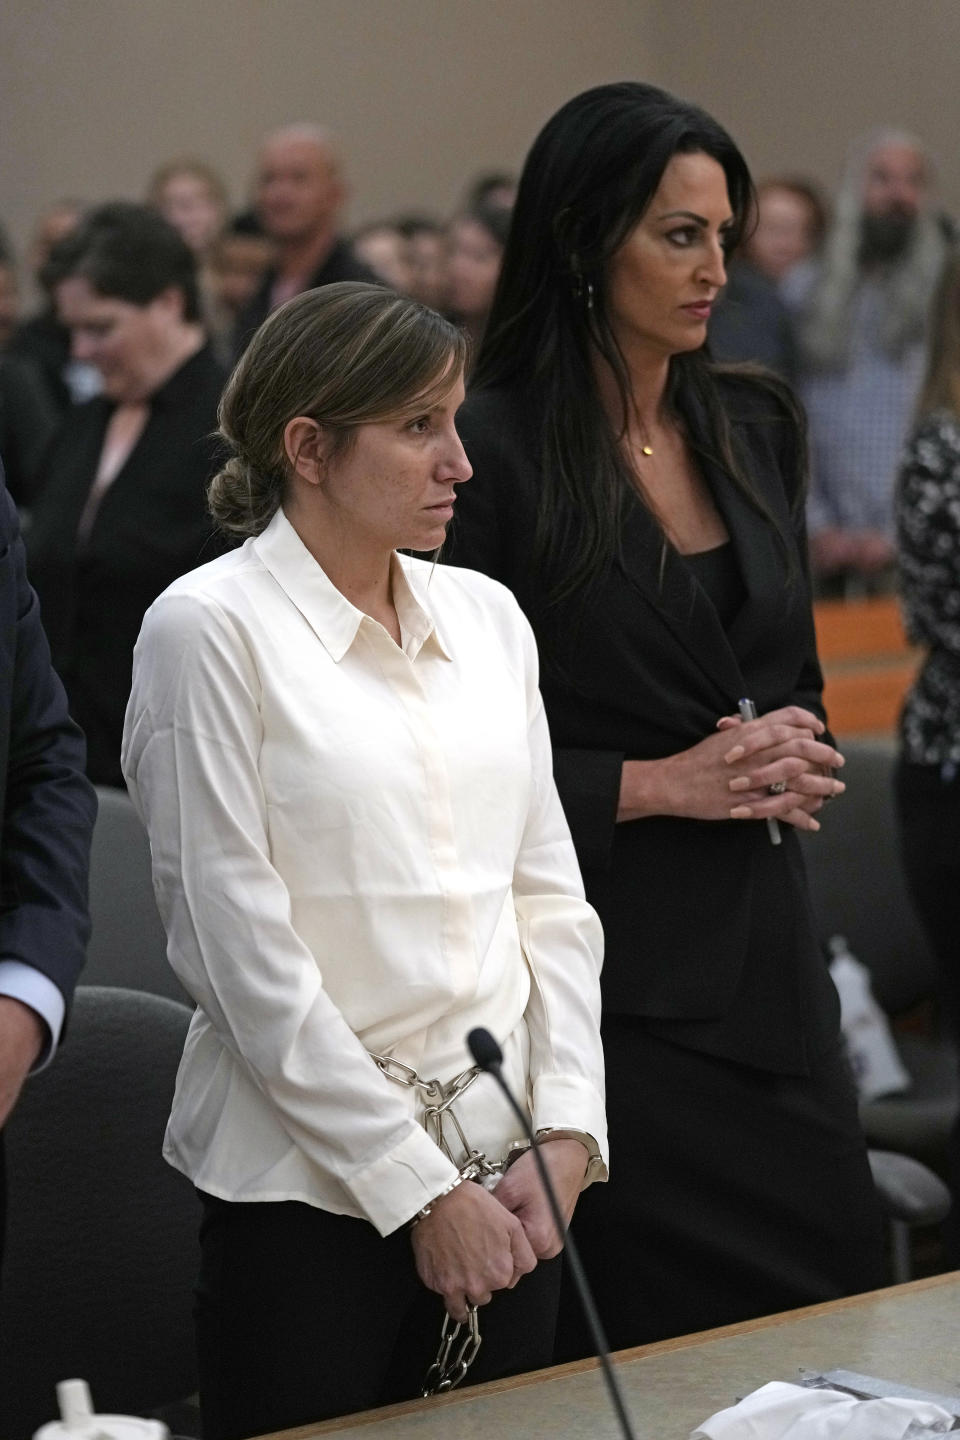 Kouri Richins, a Utah mother of three who authorities say fatally poisoned her husband then wrote a children's book about grieving, looks on as she stands with her attorney Skye Lazaro during a bail hearing Monday, June 12, 2023, in Park City, Utah. A judge ruled to keep her in custody for the duration of her trial. (AP Photo/Rick Bowmer, Pool)